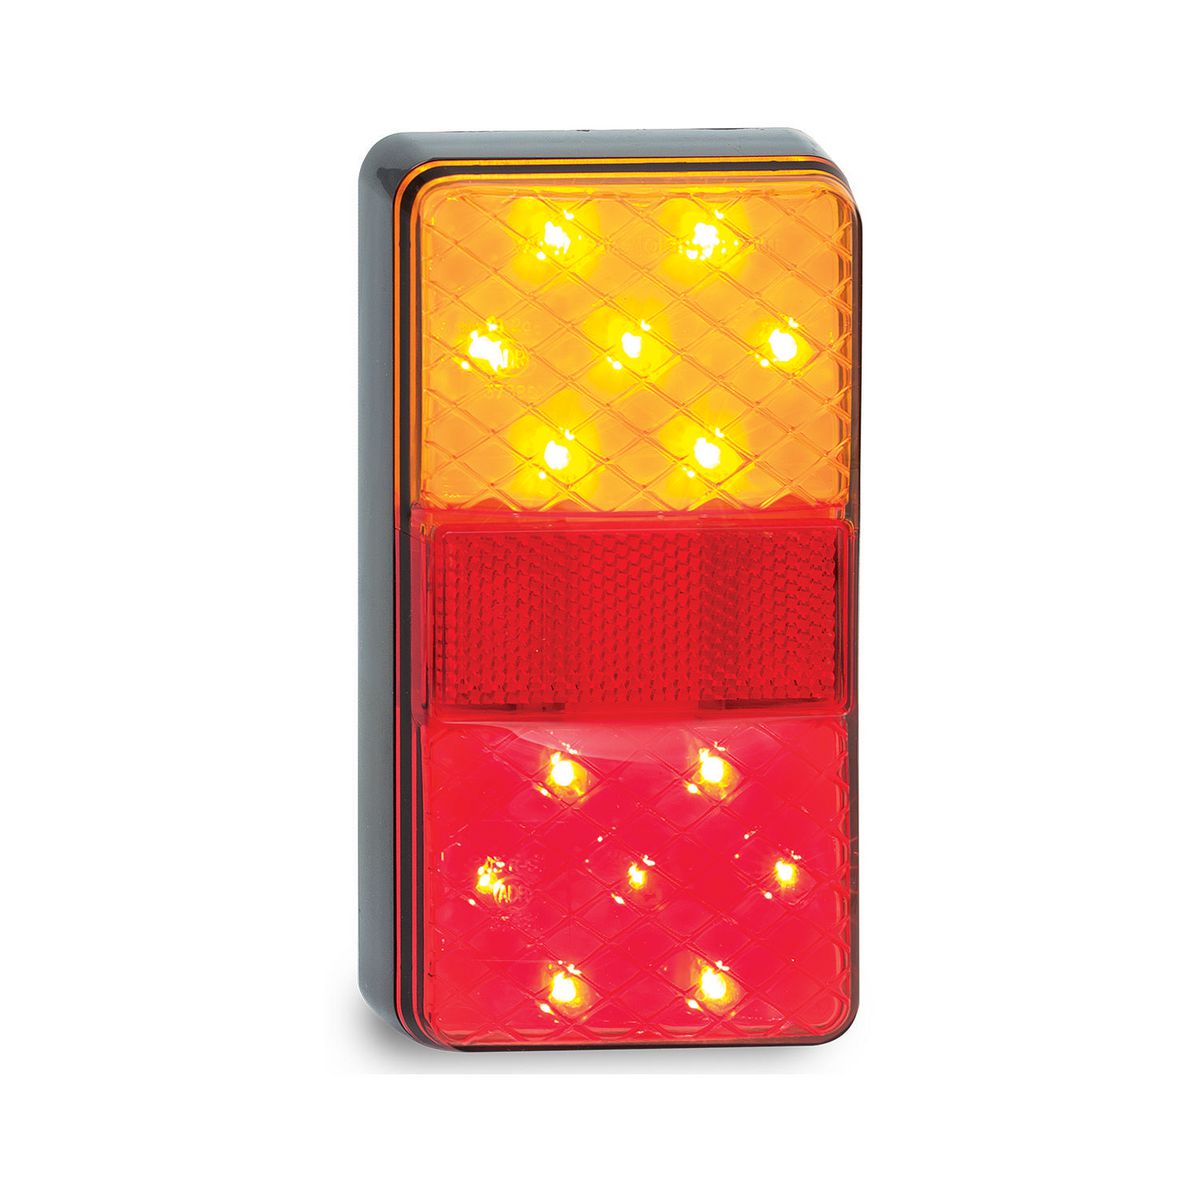 2 X STOP/TAIL/INDICATOR LAMP WITH REFLEX REFLECTOR TO SUIT 12VOLT ONLY